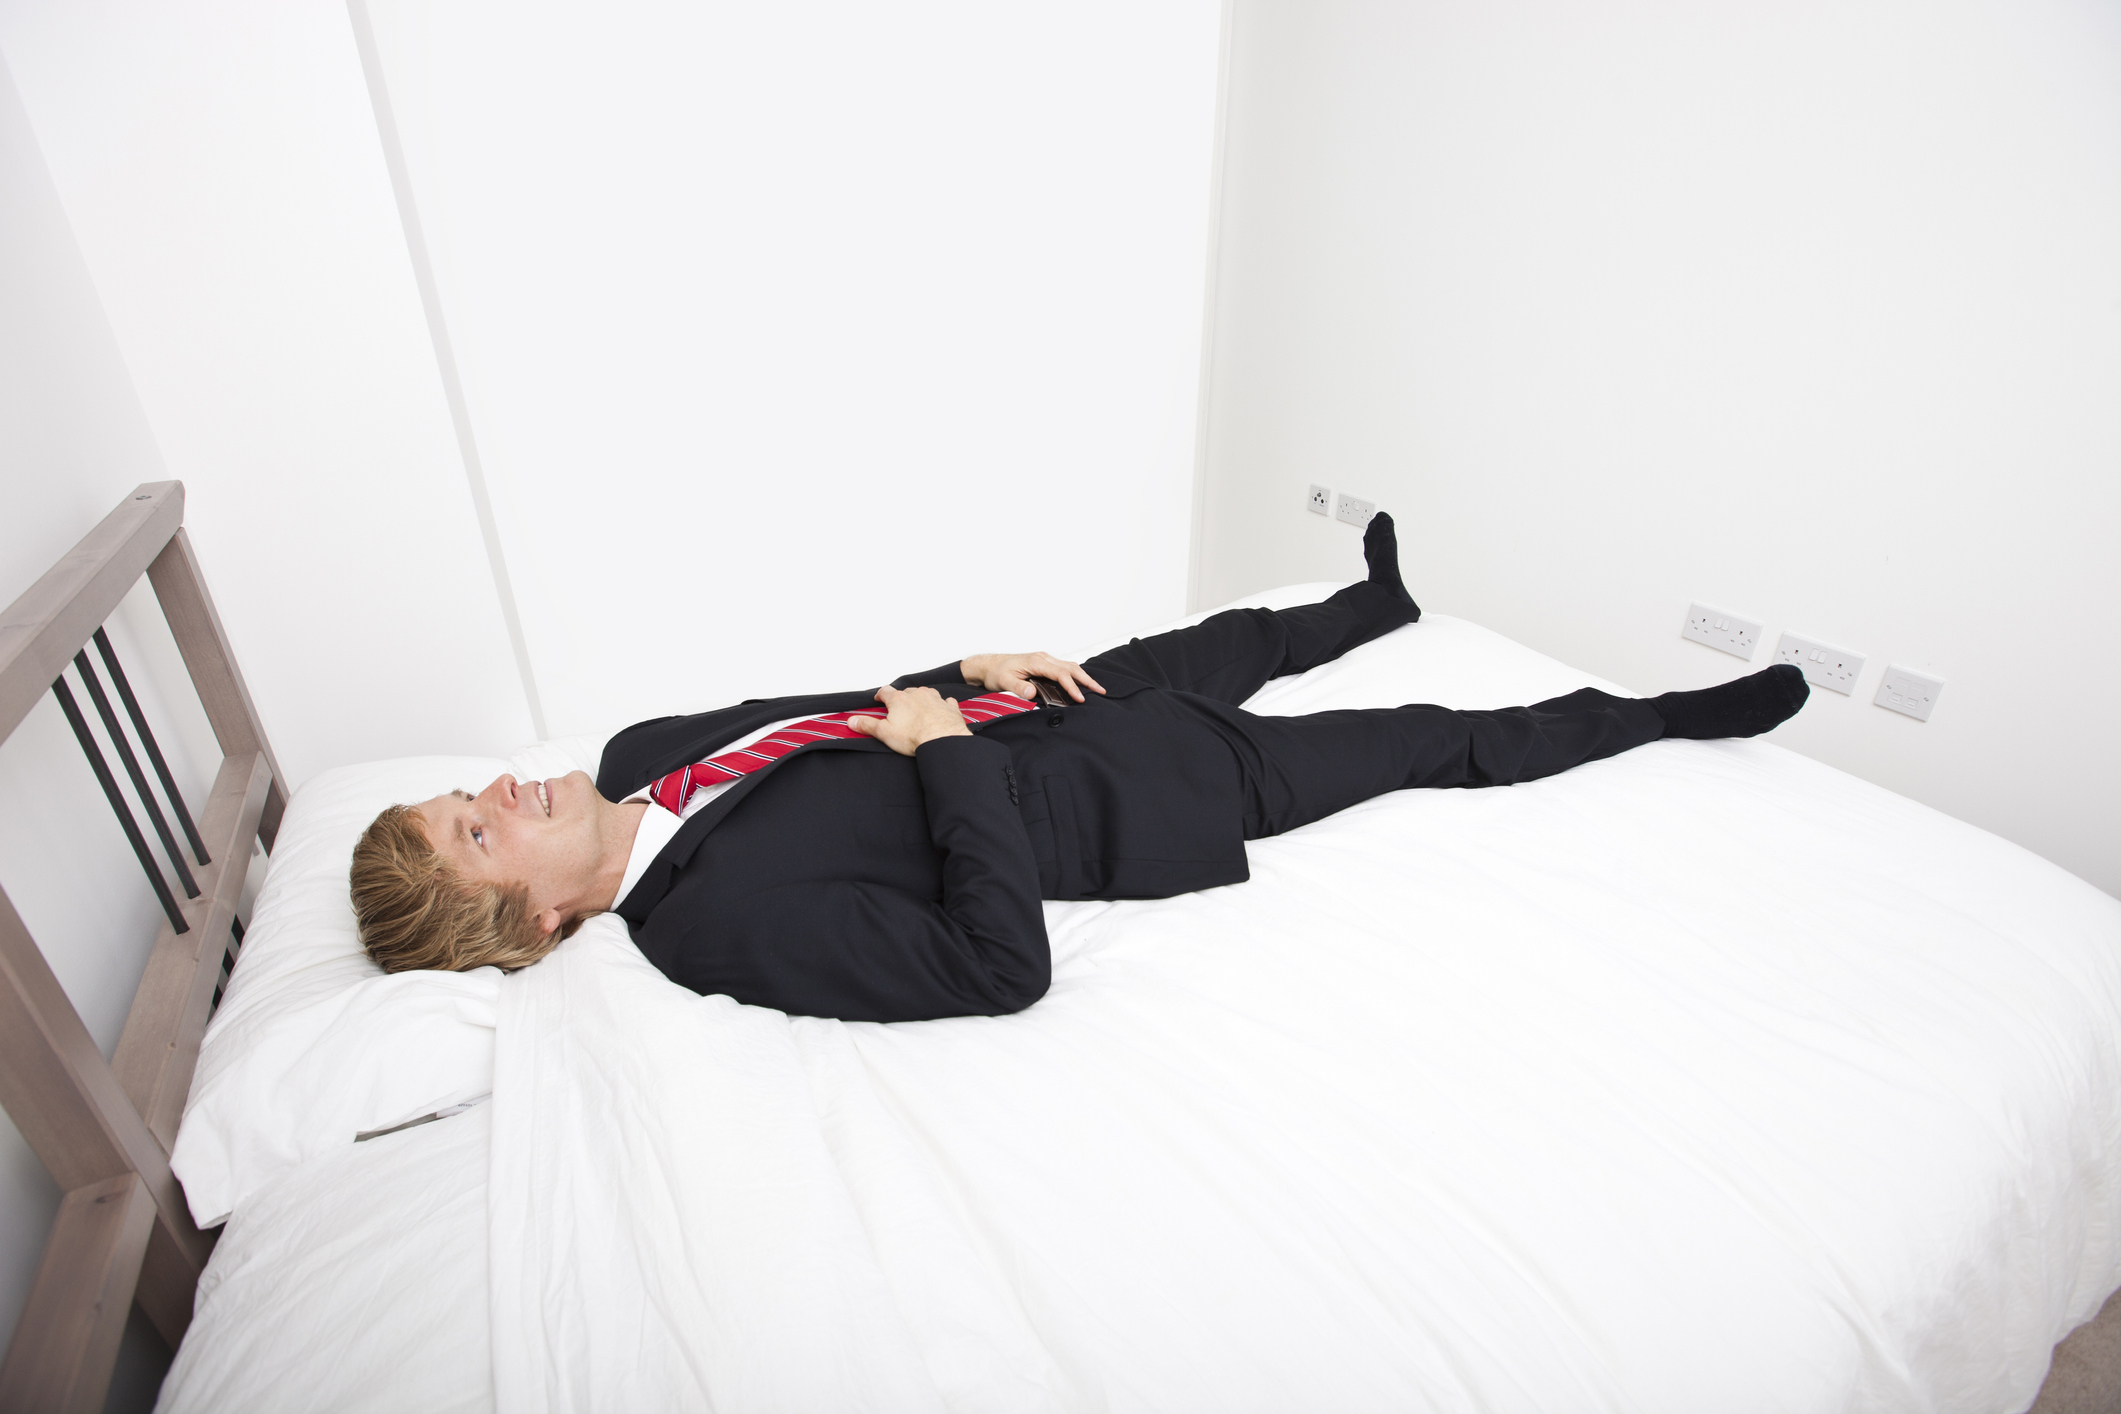 Person in a suit lying on a bed with one leg raised, looking upward